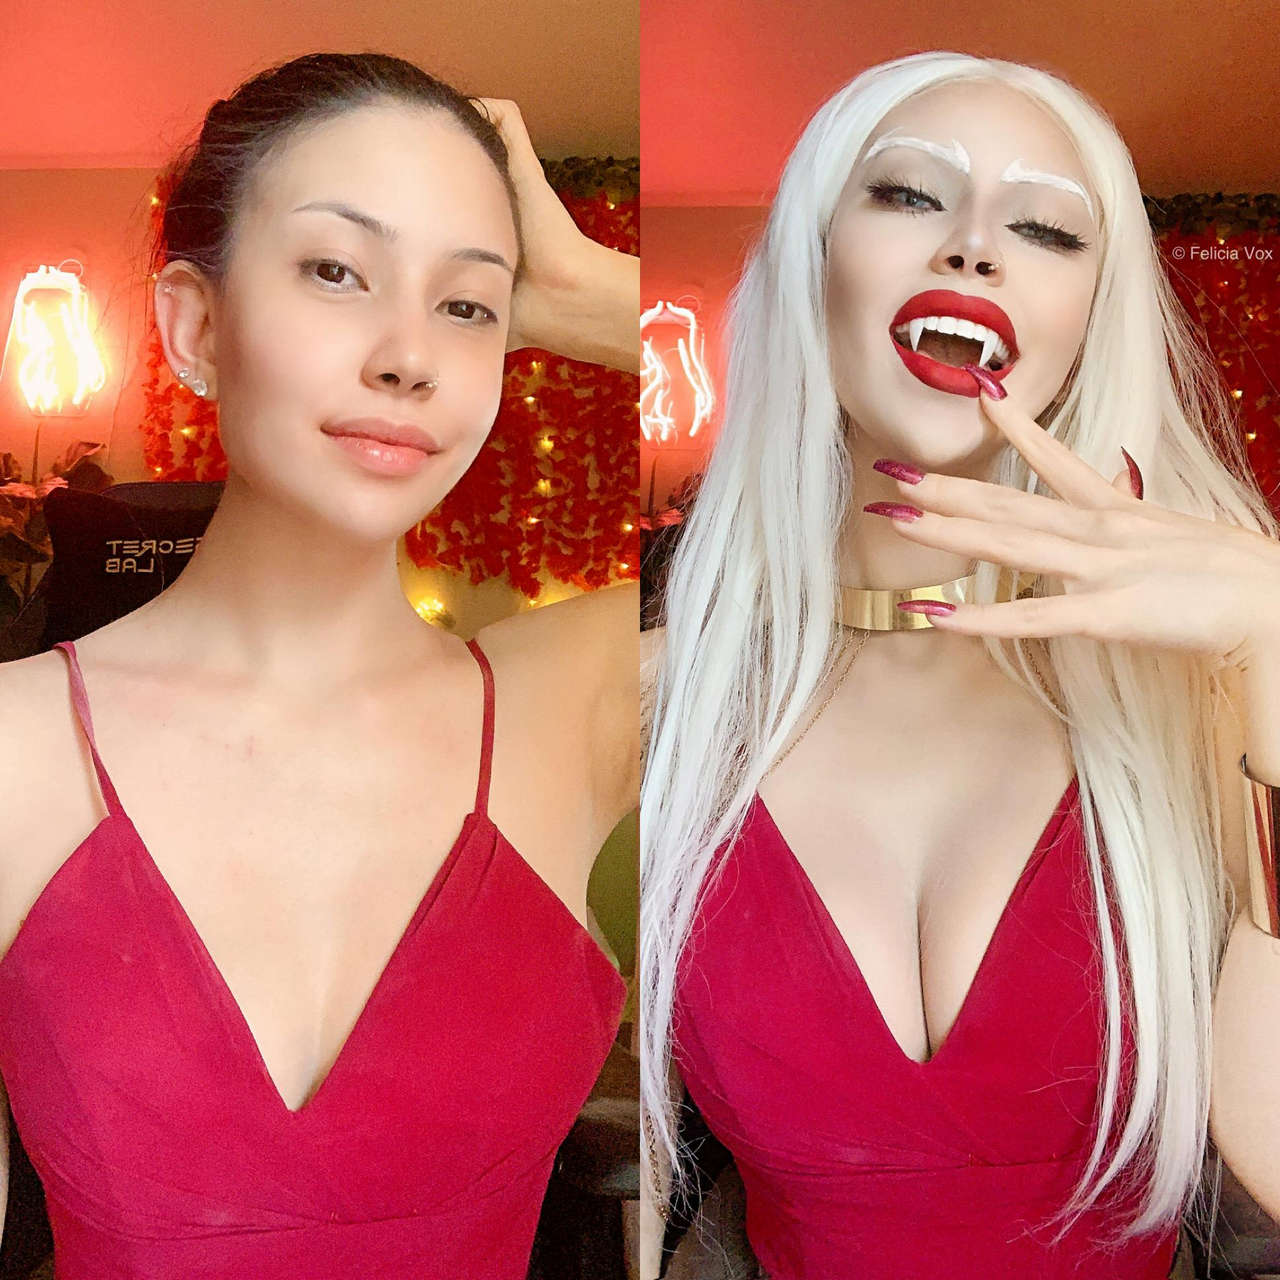 Carmilla From Castlevania Closet Cosplay Before And After By Felicia Vo